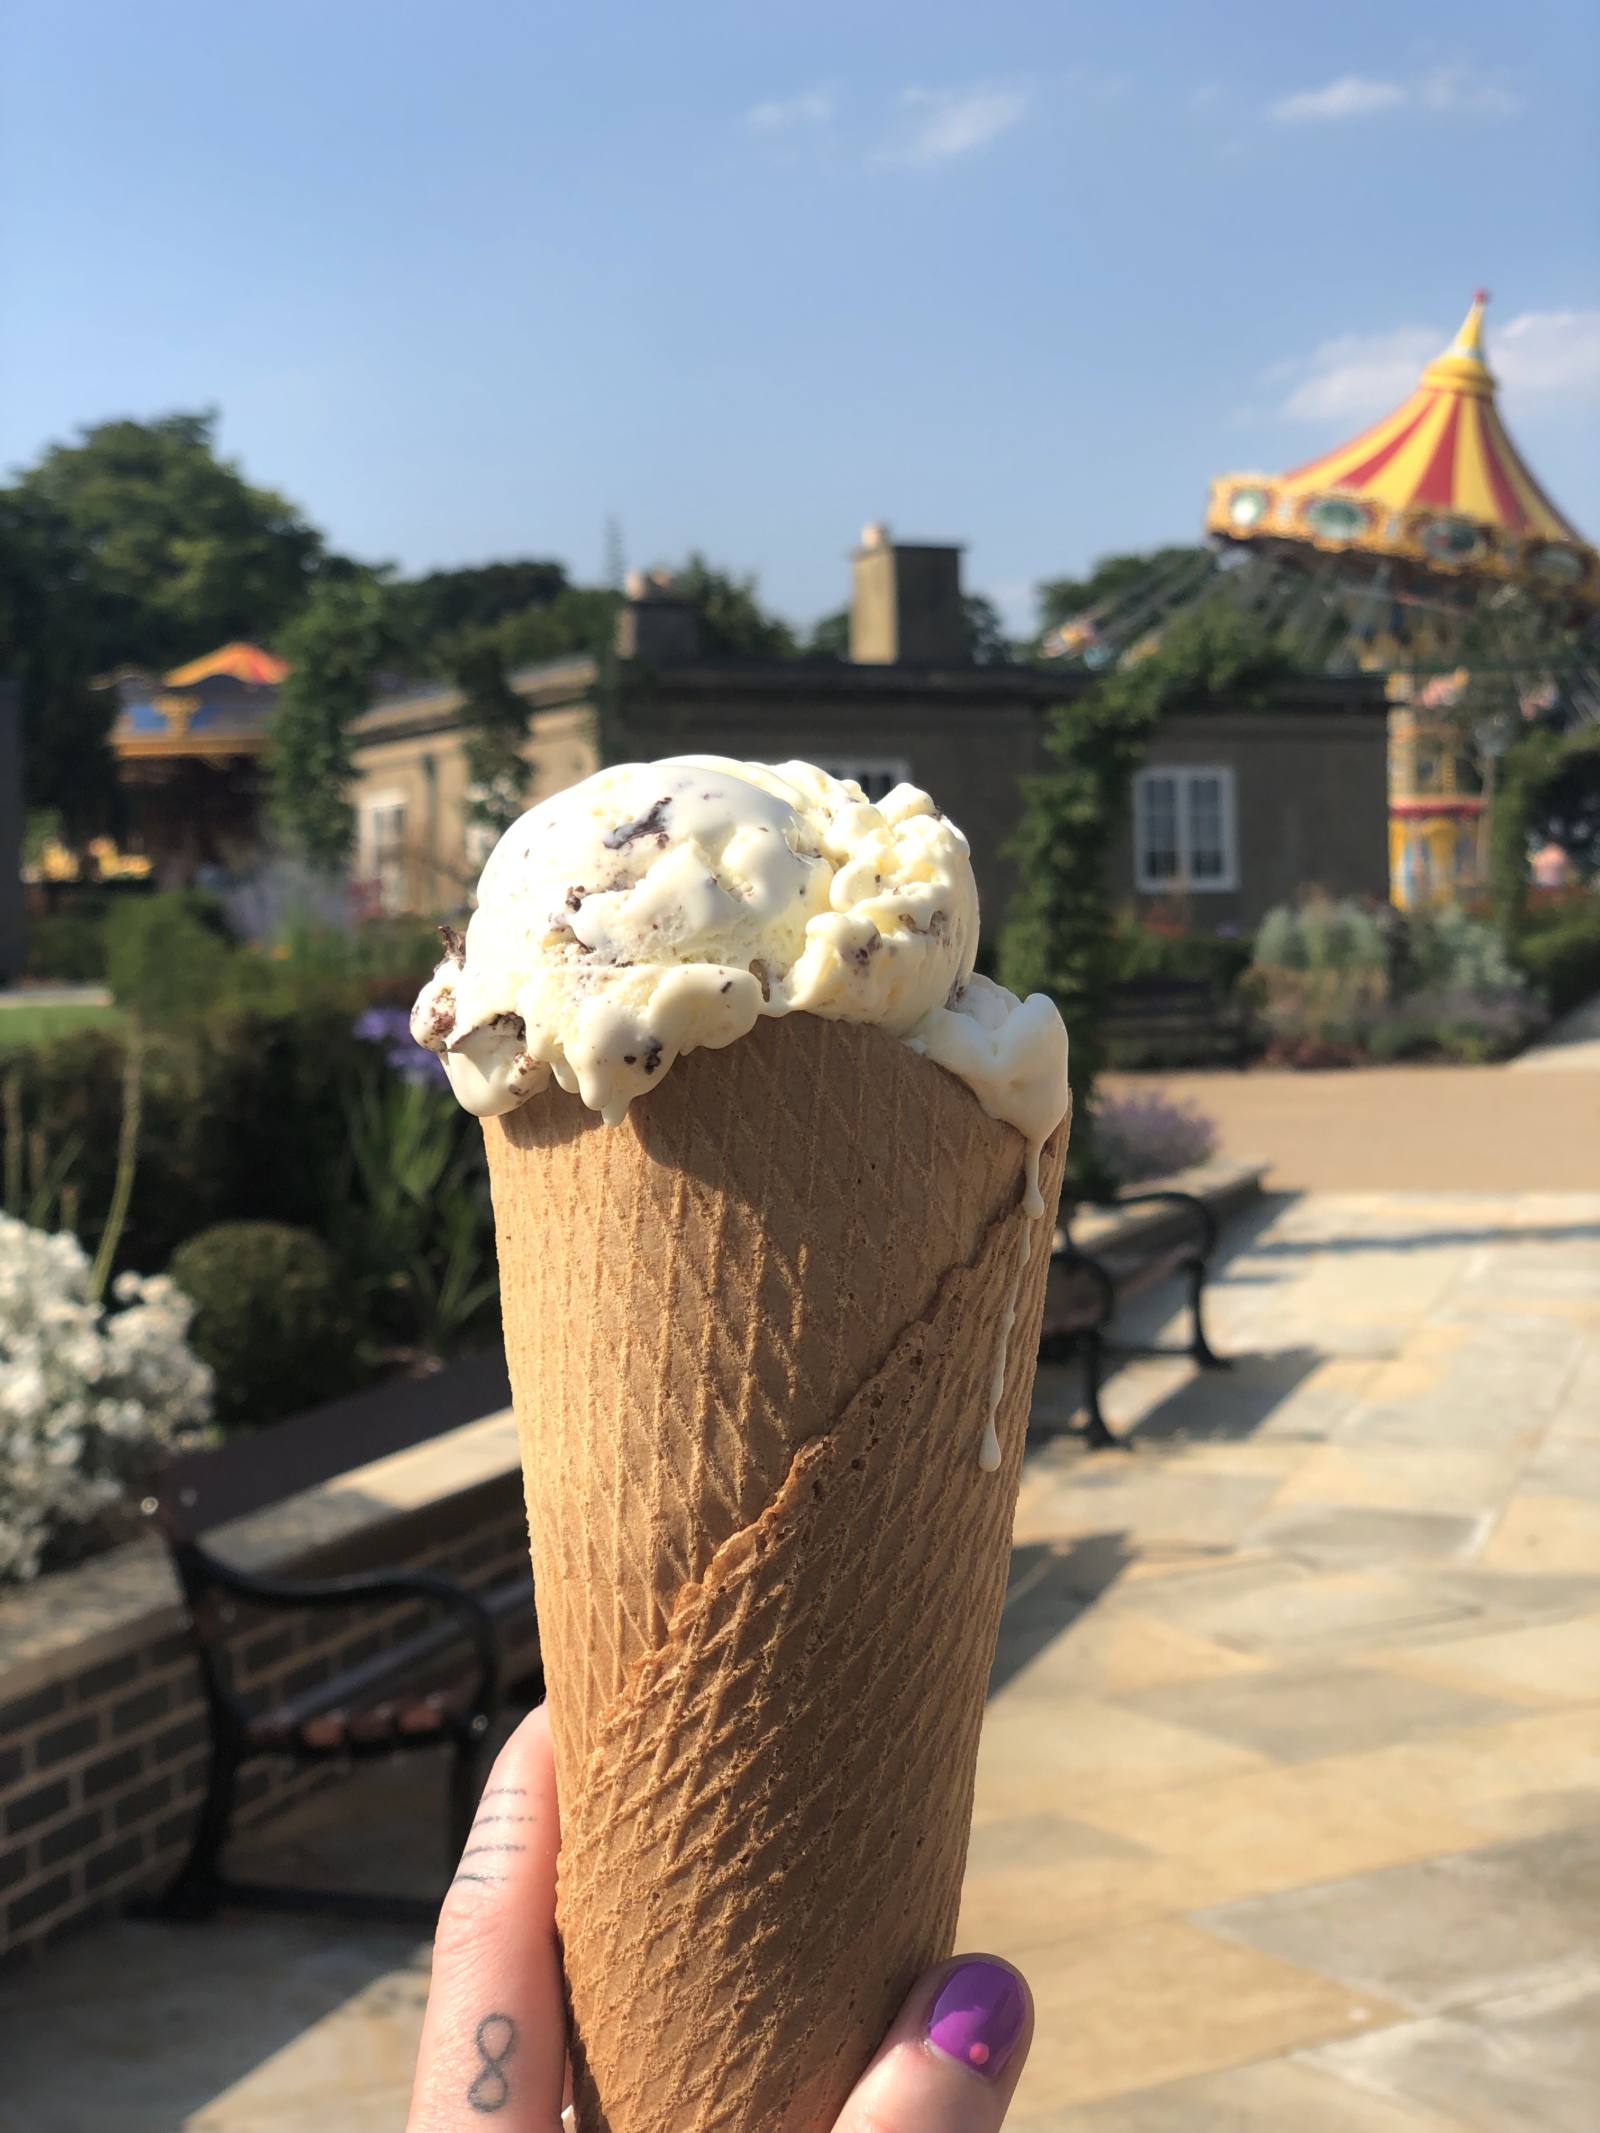 another huge ice cream at Wicksteed Park! This one is held up to camera with the carousel showing in the background